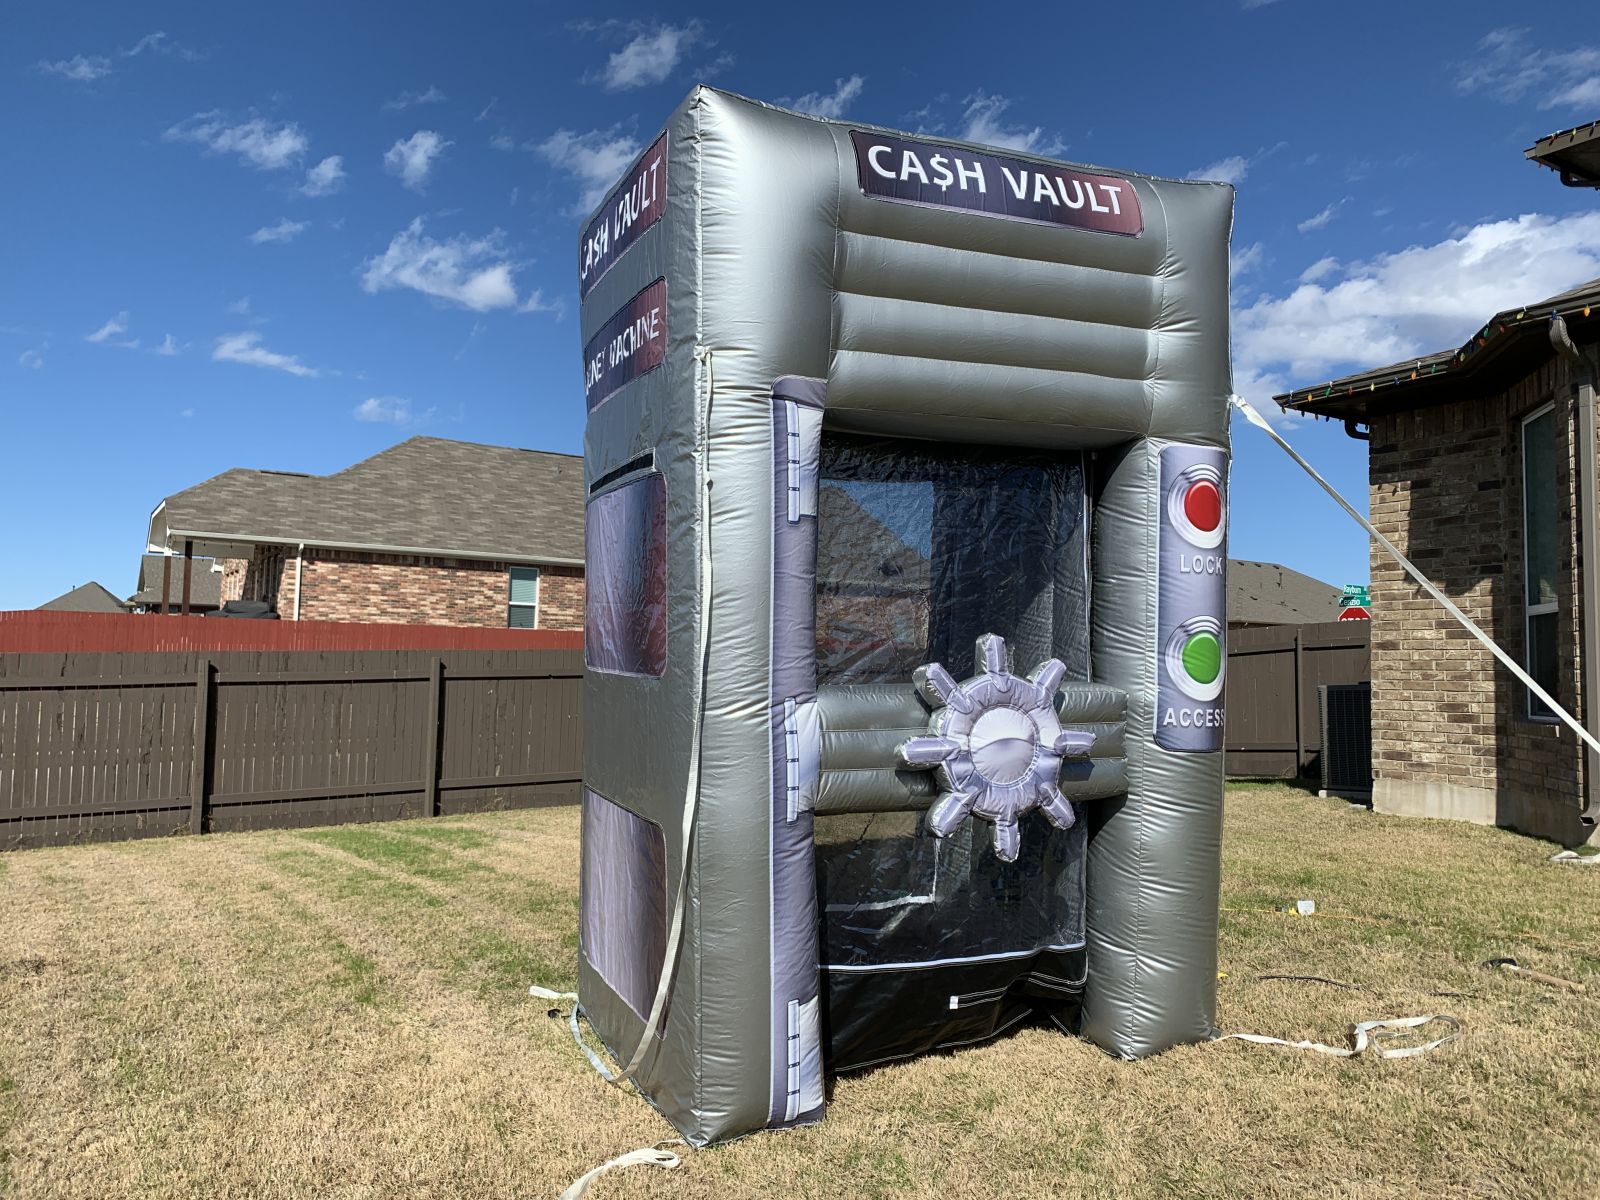 Cash Cube Rental in Austin Texas from Austin Bounce House Rentals